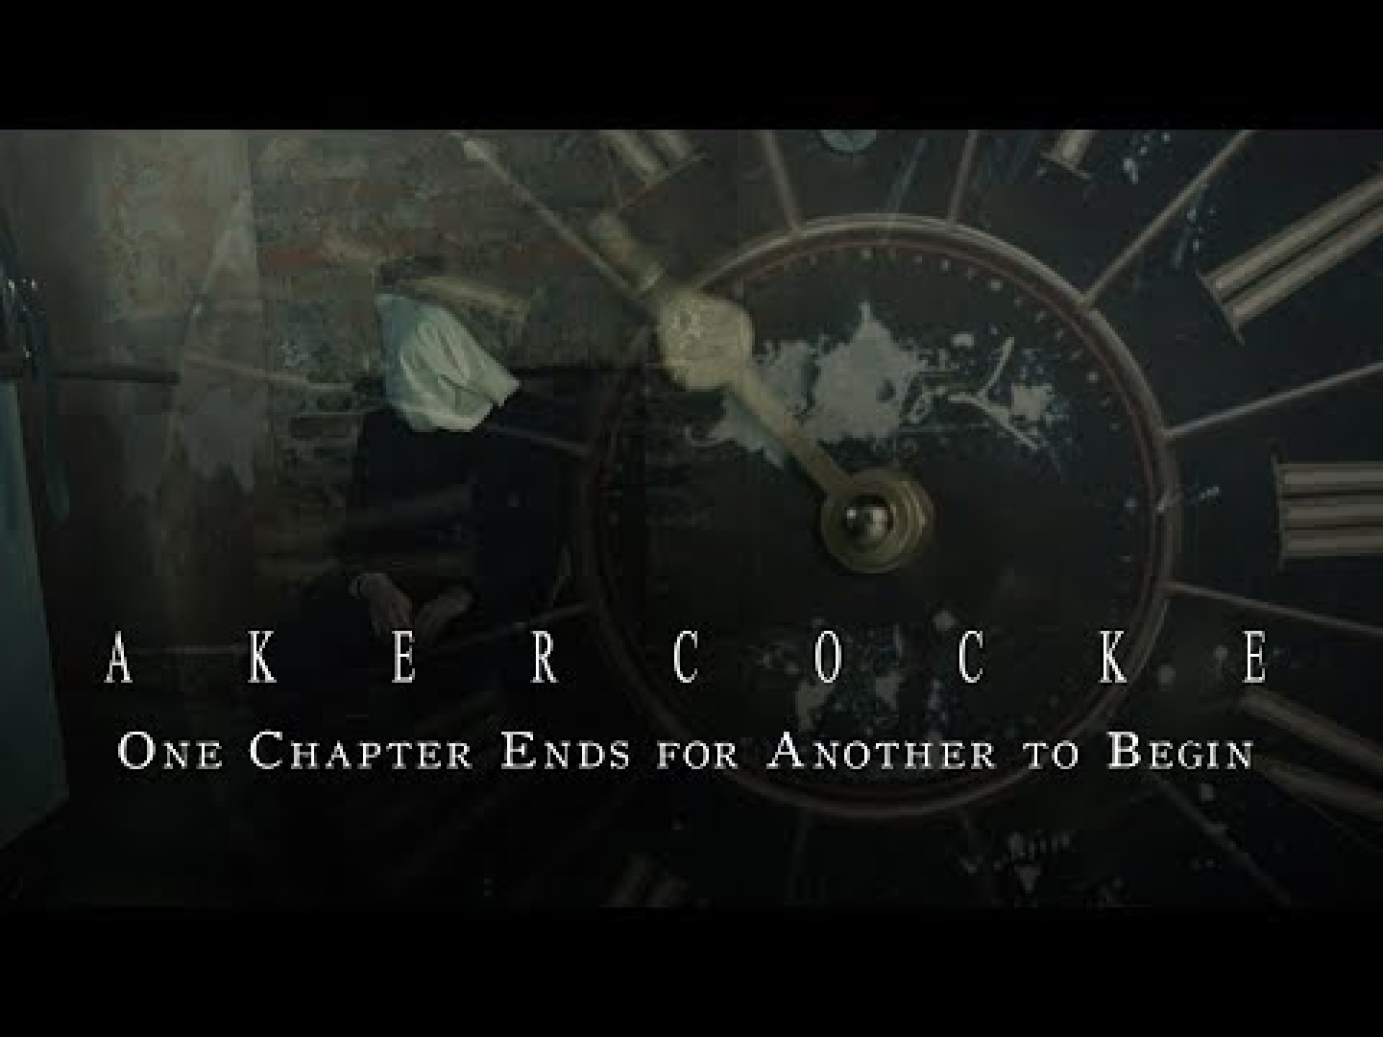 Akercocke - One Chapter Ends for Another to Begin